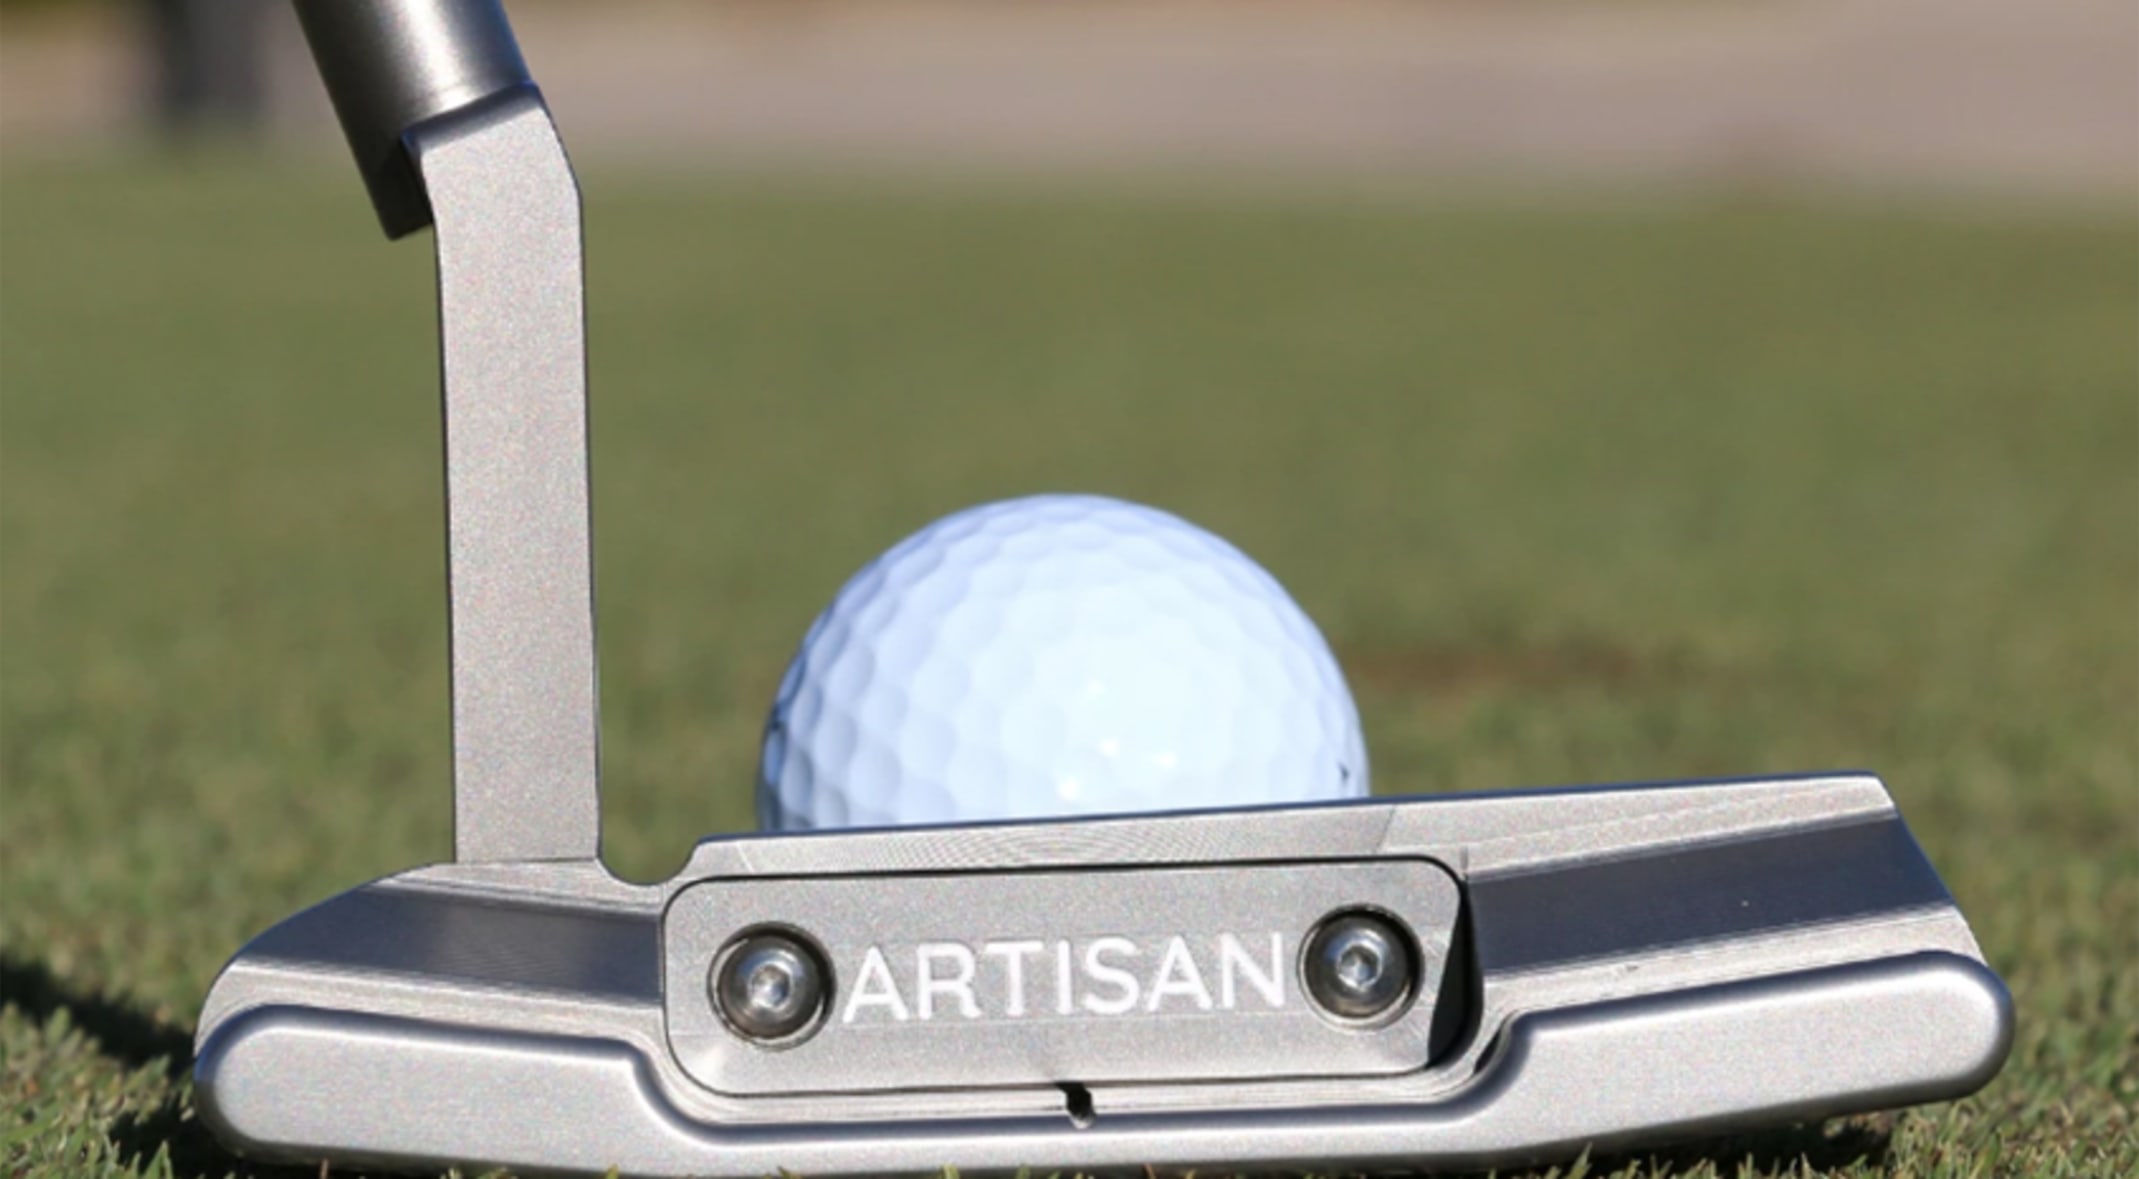 Golf launches website, online store